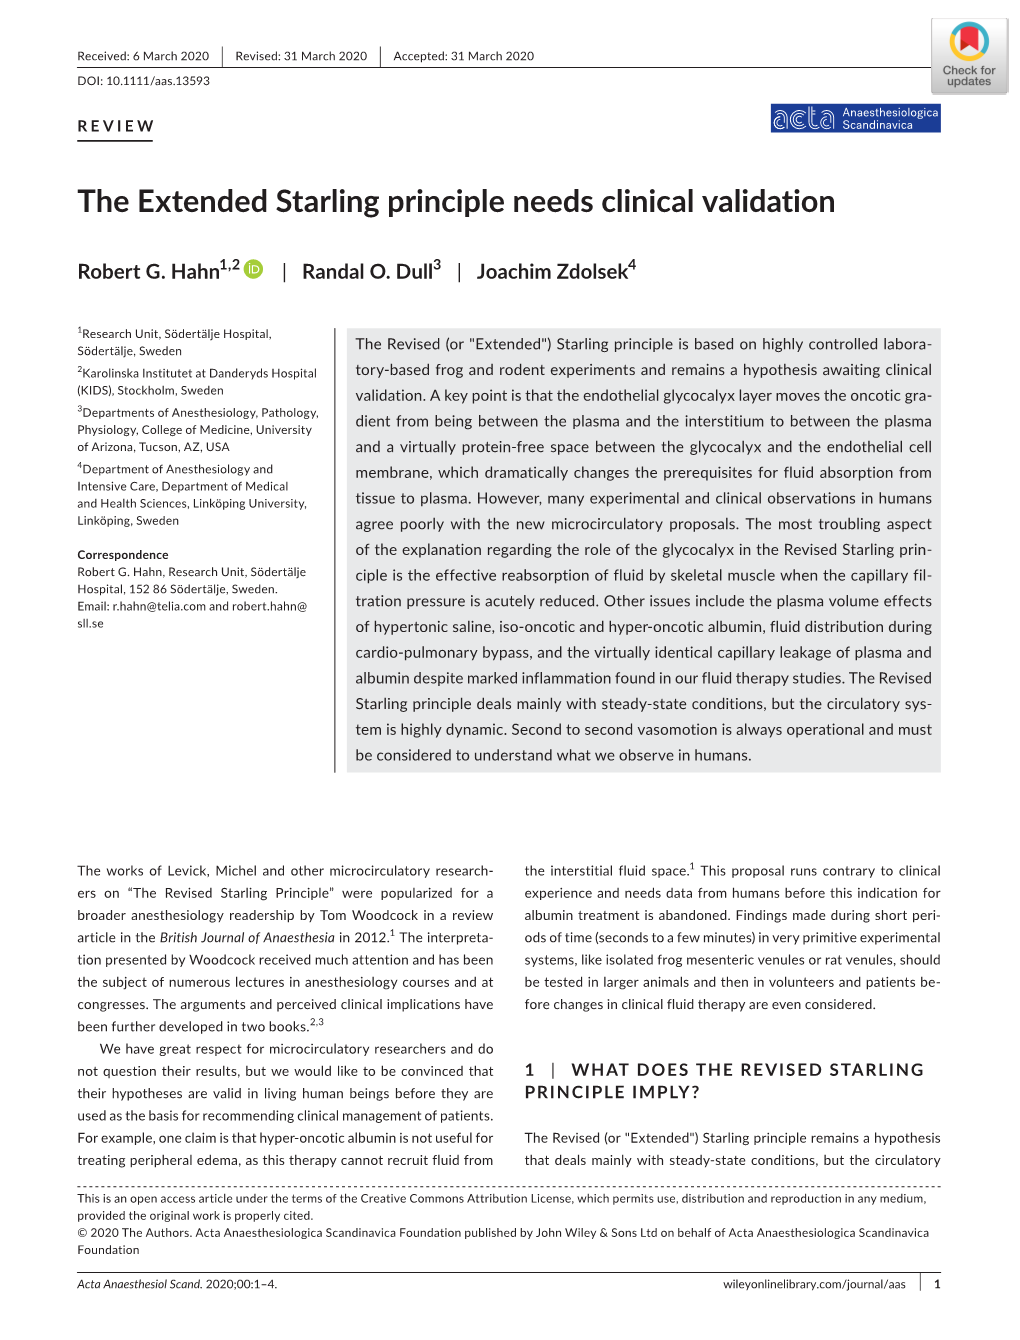 The Extended Starling Principle Needs Clinical Validation